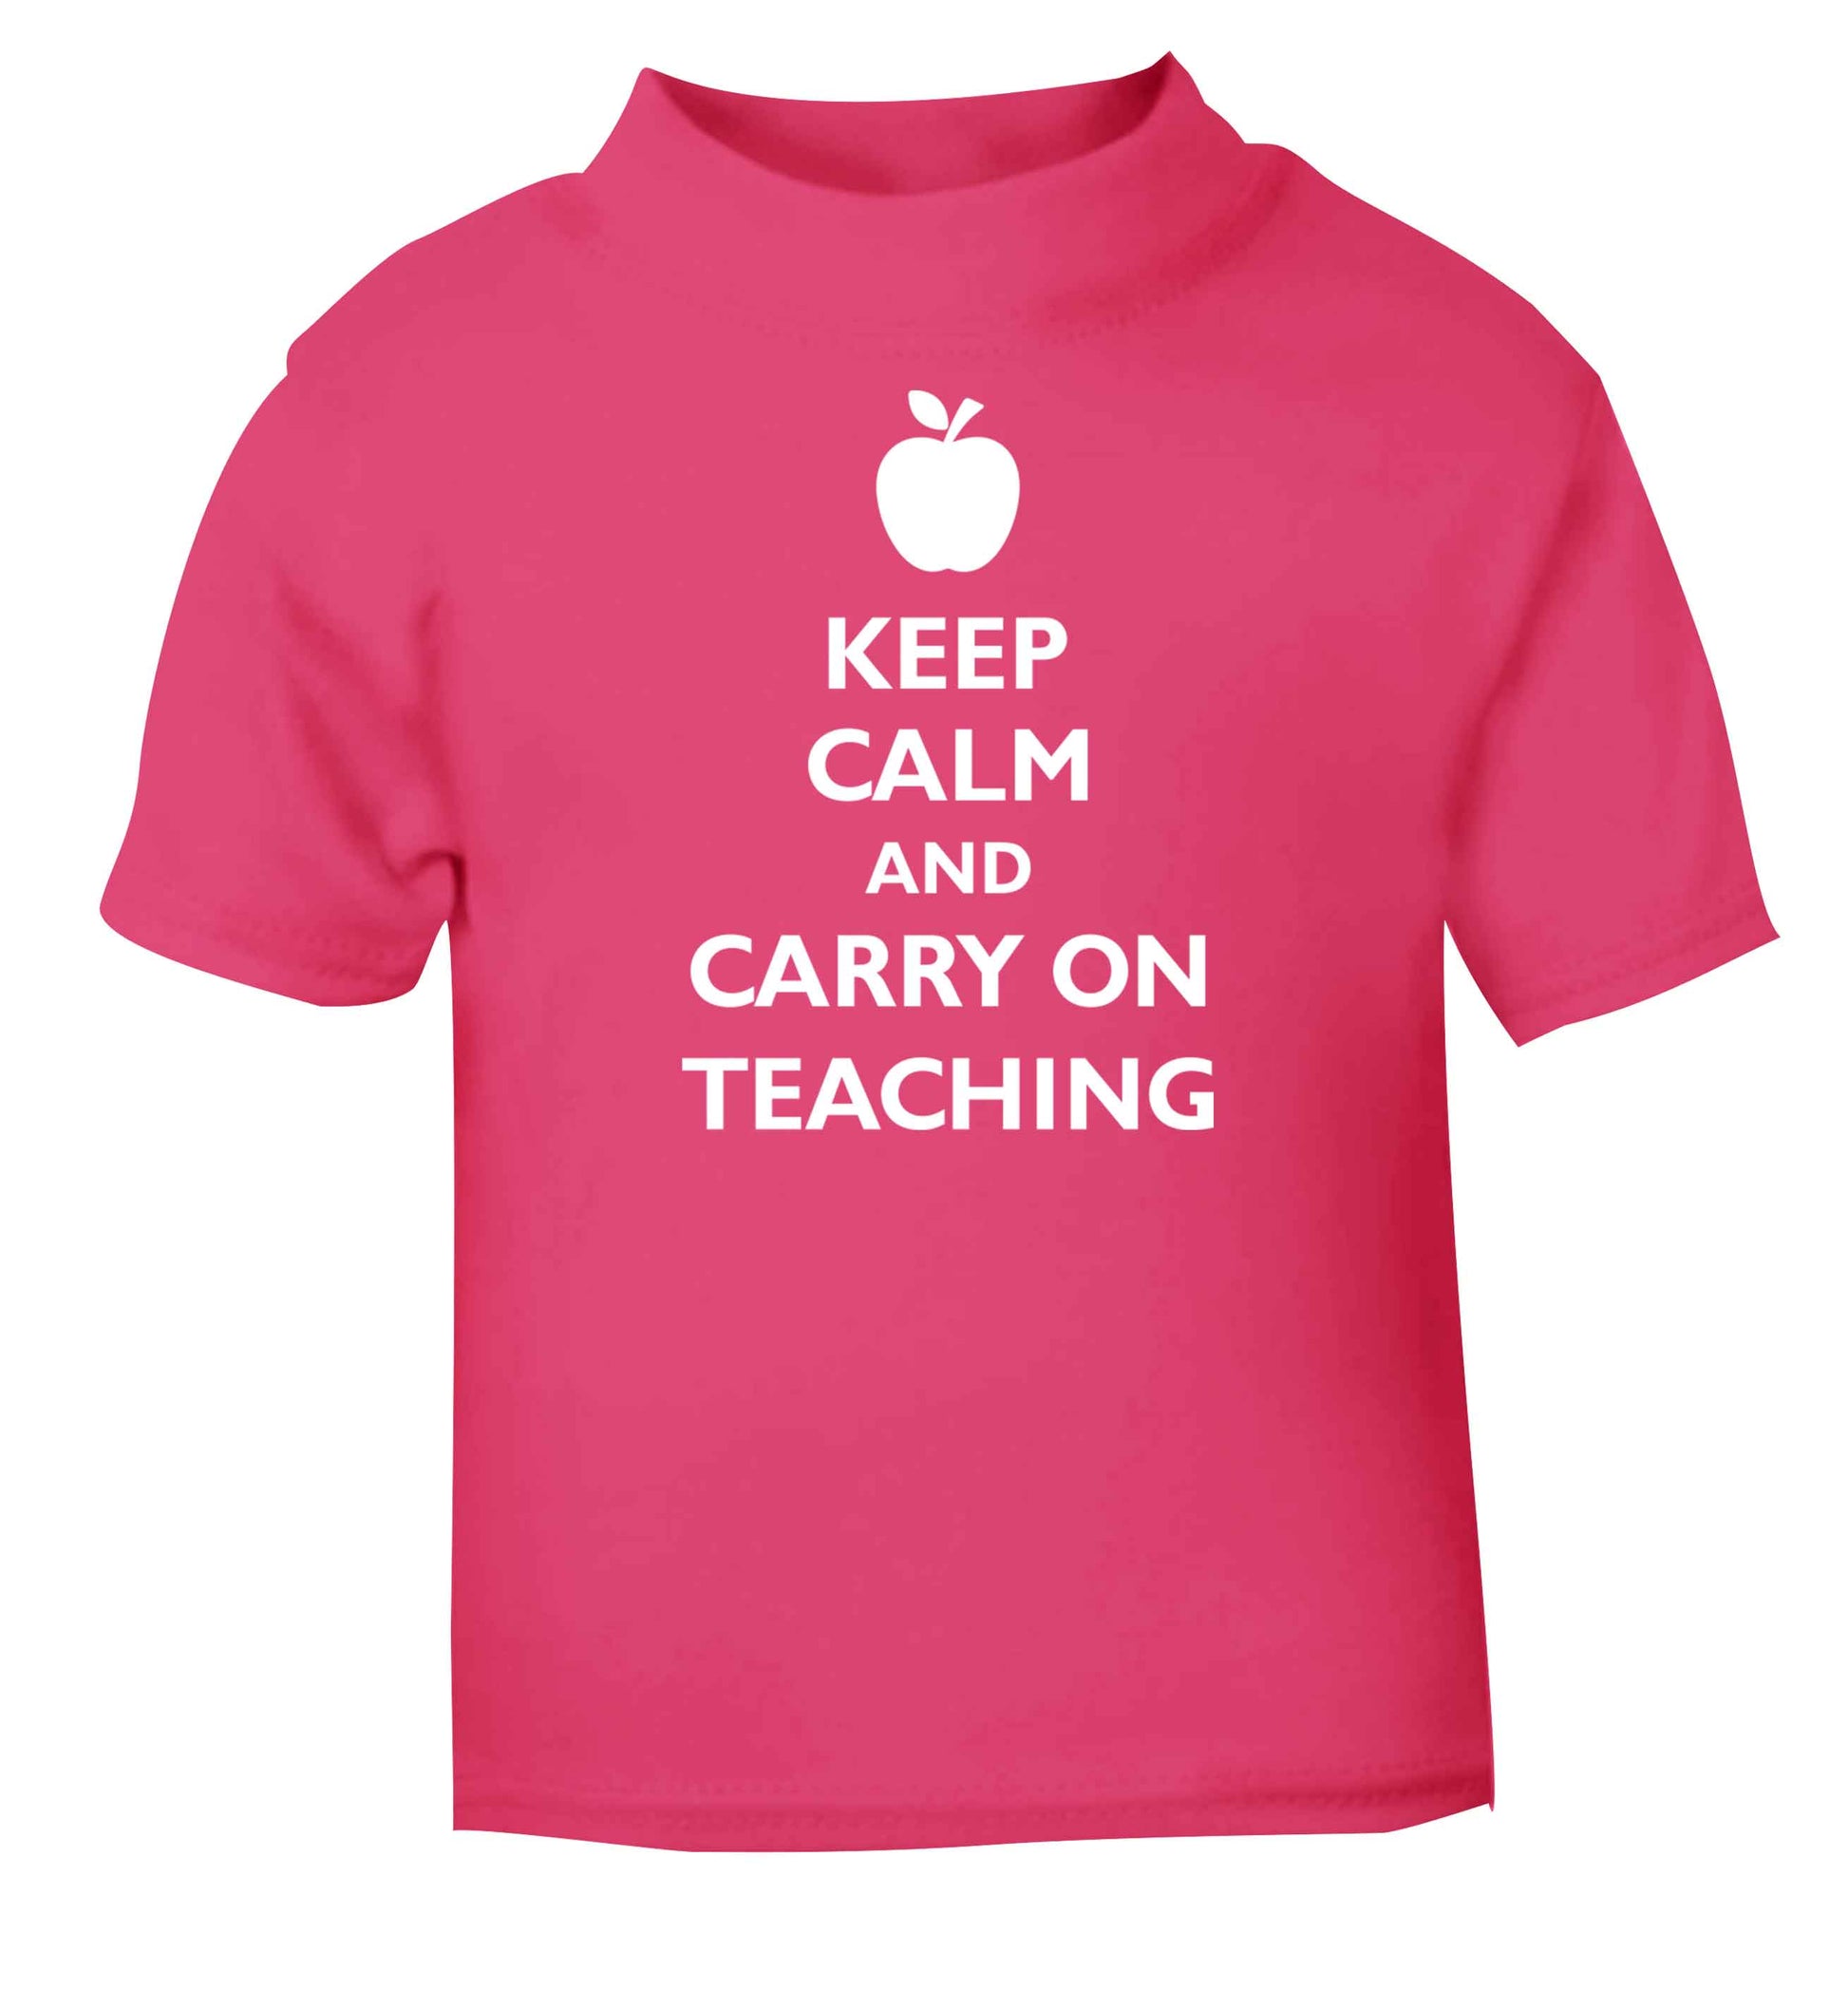 Keep calm and carry on teaching pink baby toddler Tshirt 2 Years